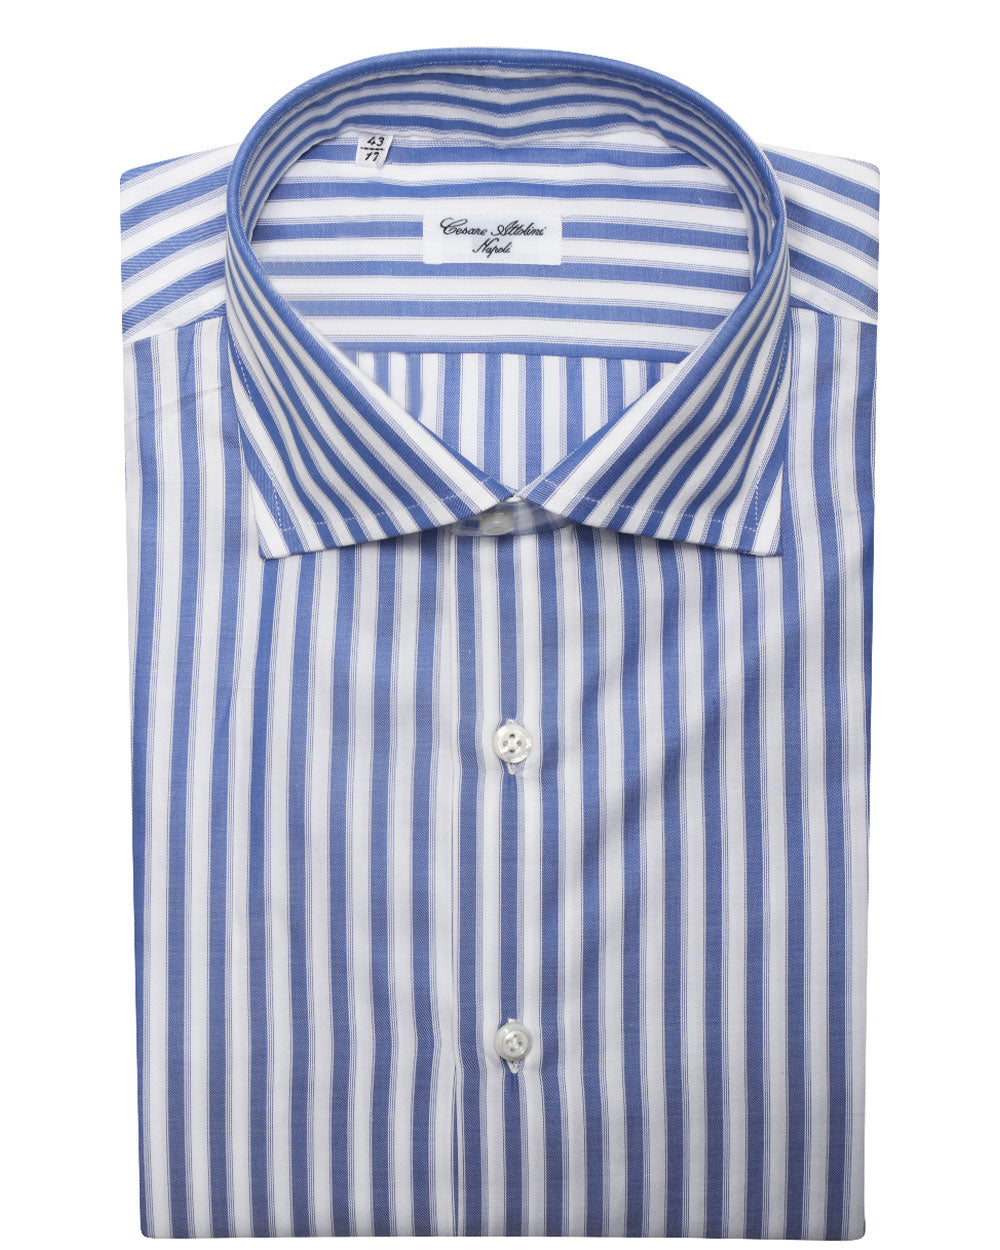 Blue and White Striped Cotton Sportshirt